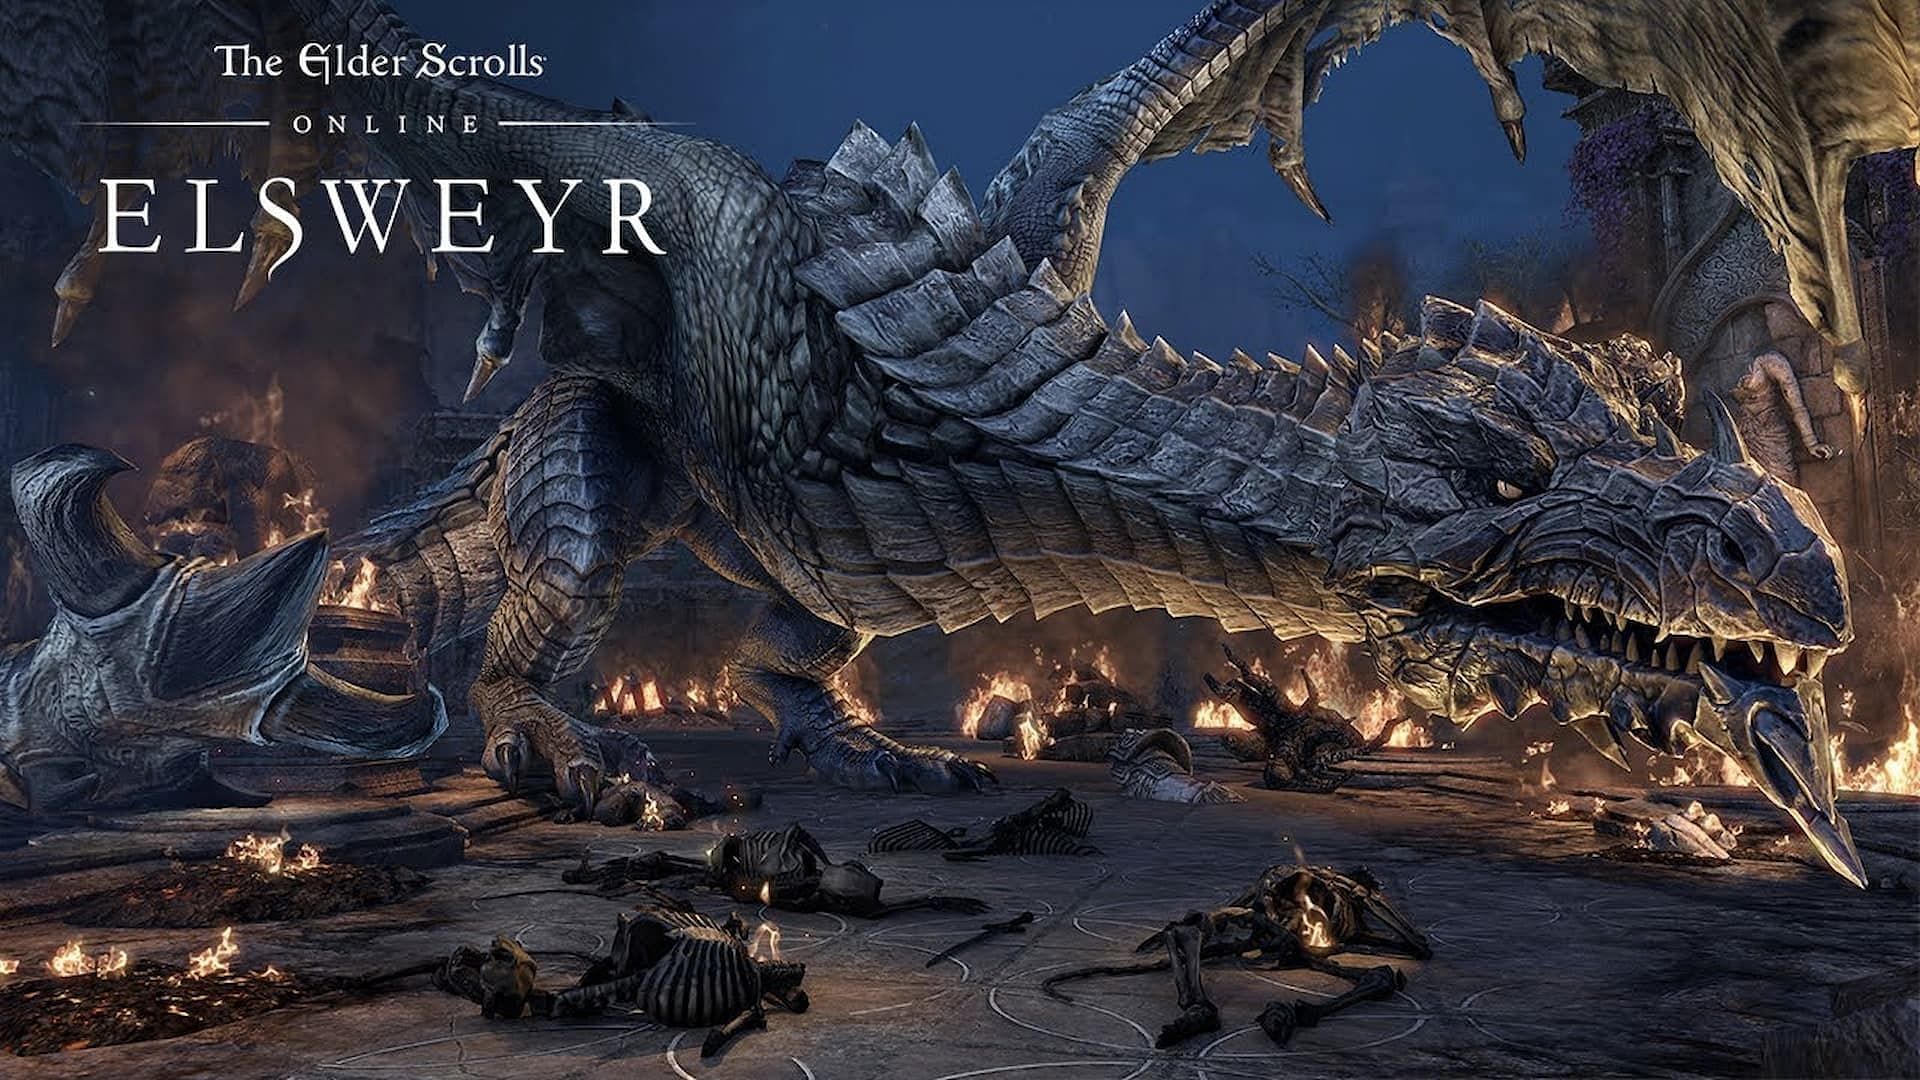 Elsweyr introduces dragons for the first time to ESO (Image via Bethesda)